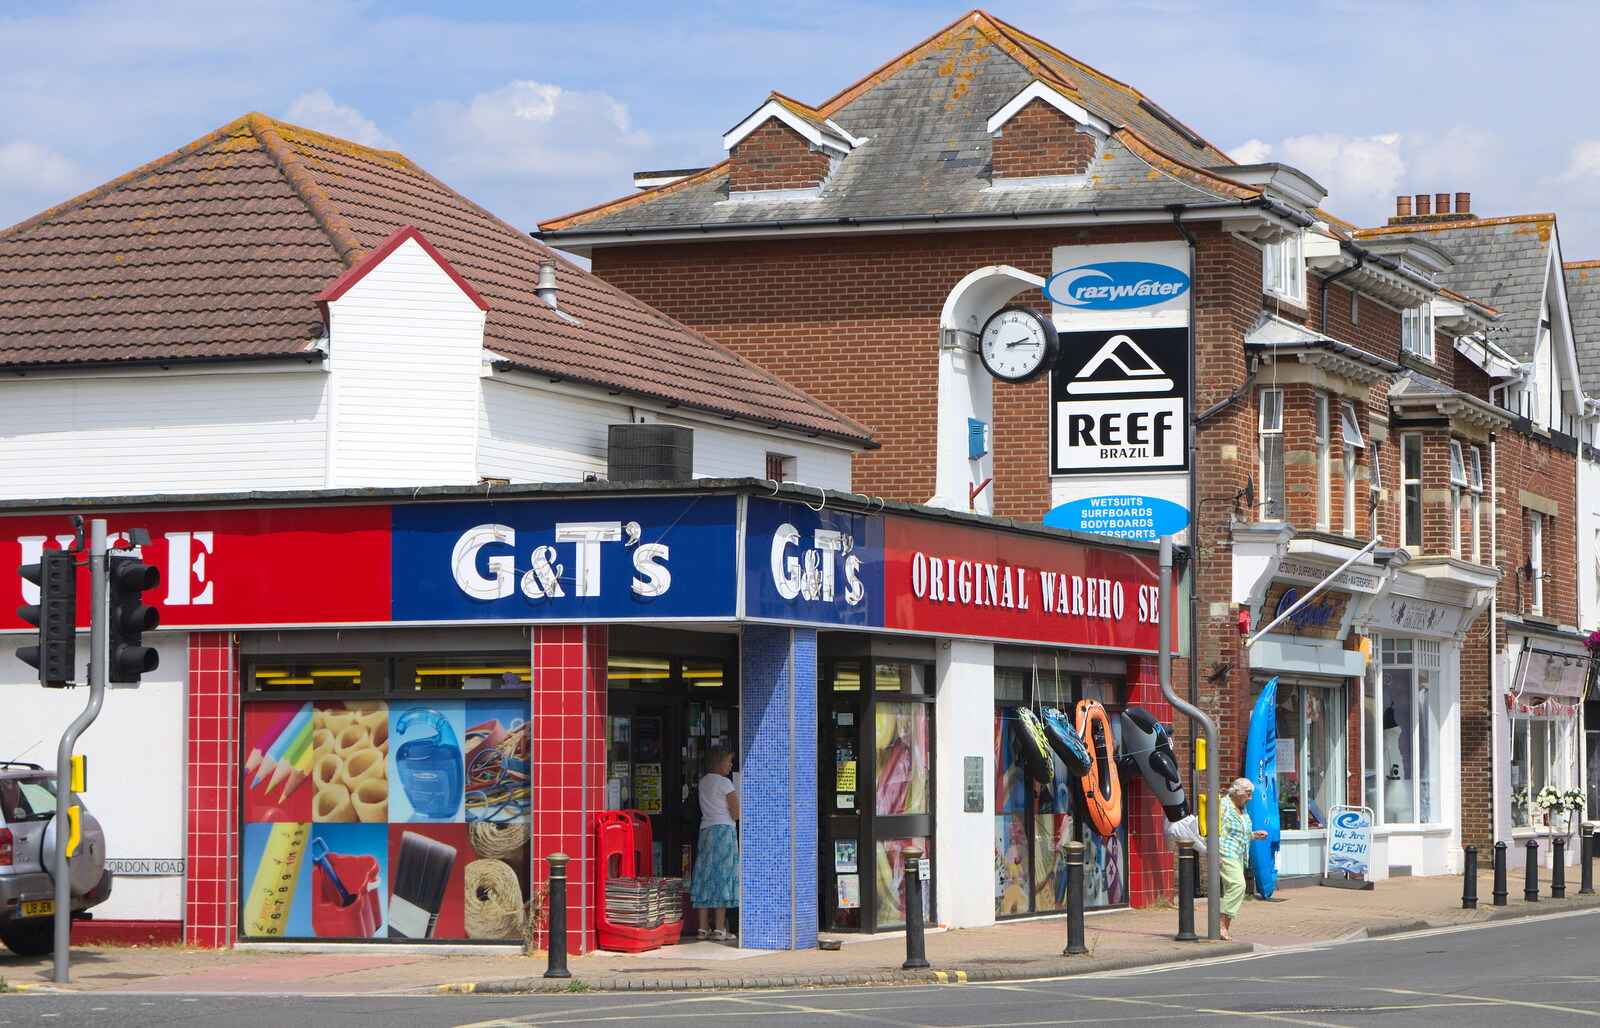 G&Ts Discount store in Highcliffe from Bob and Bernice's 50th Wedding Anniversary, Hinton Admiral, Dorset - 25th July 2014